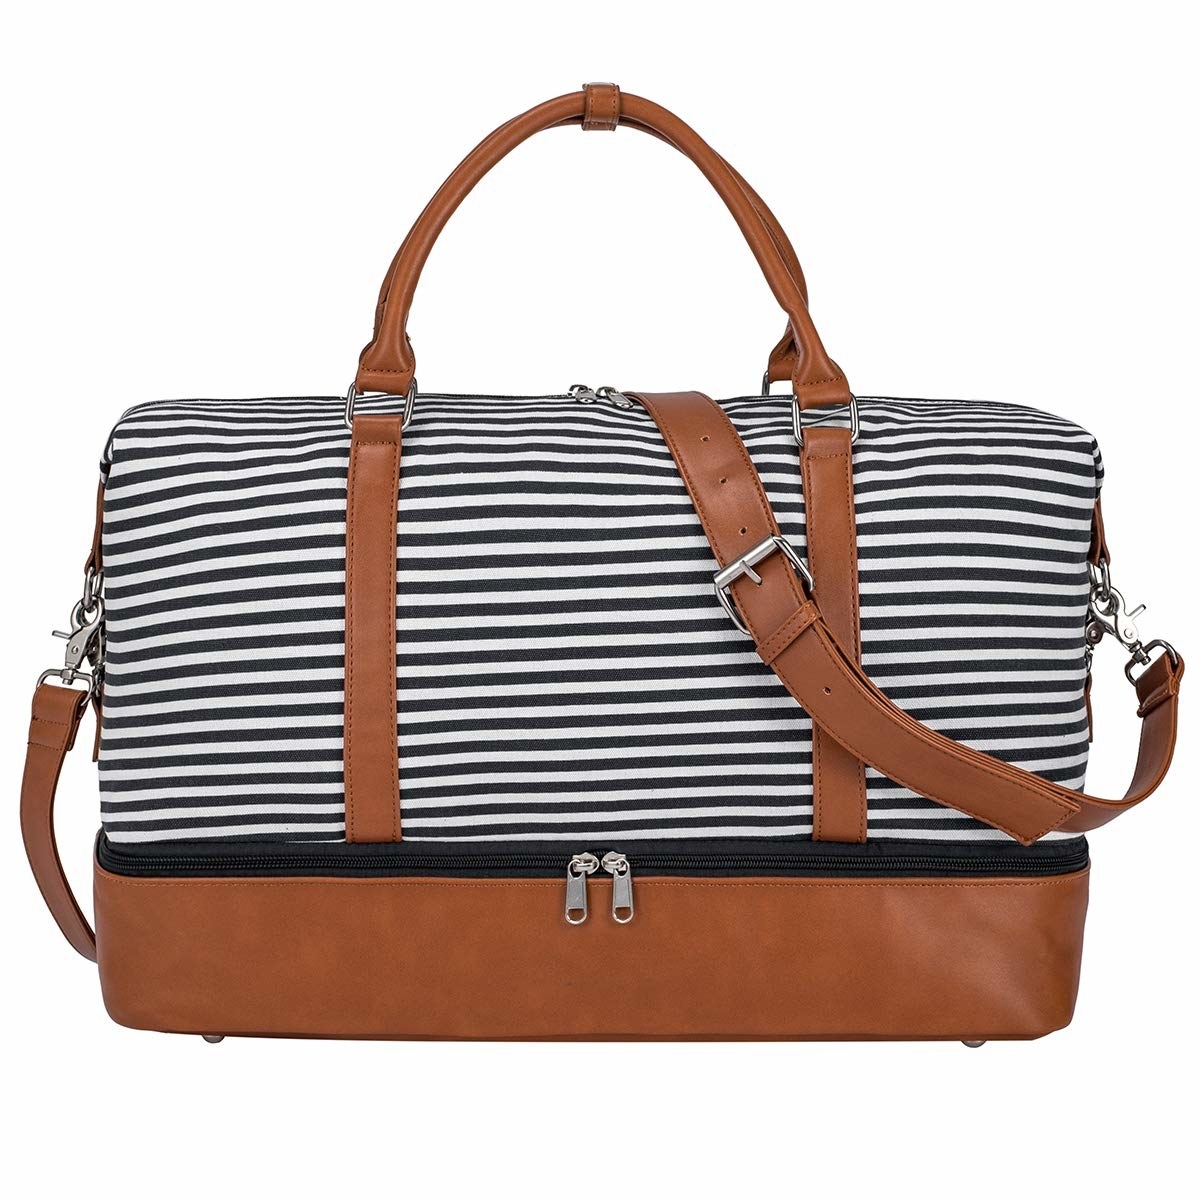 23 Weekender Bags You'll Want To Take On Your Next Trip